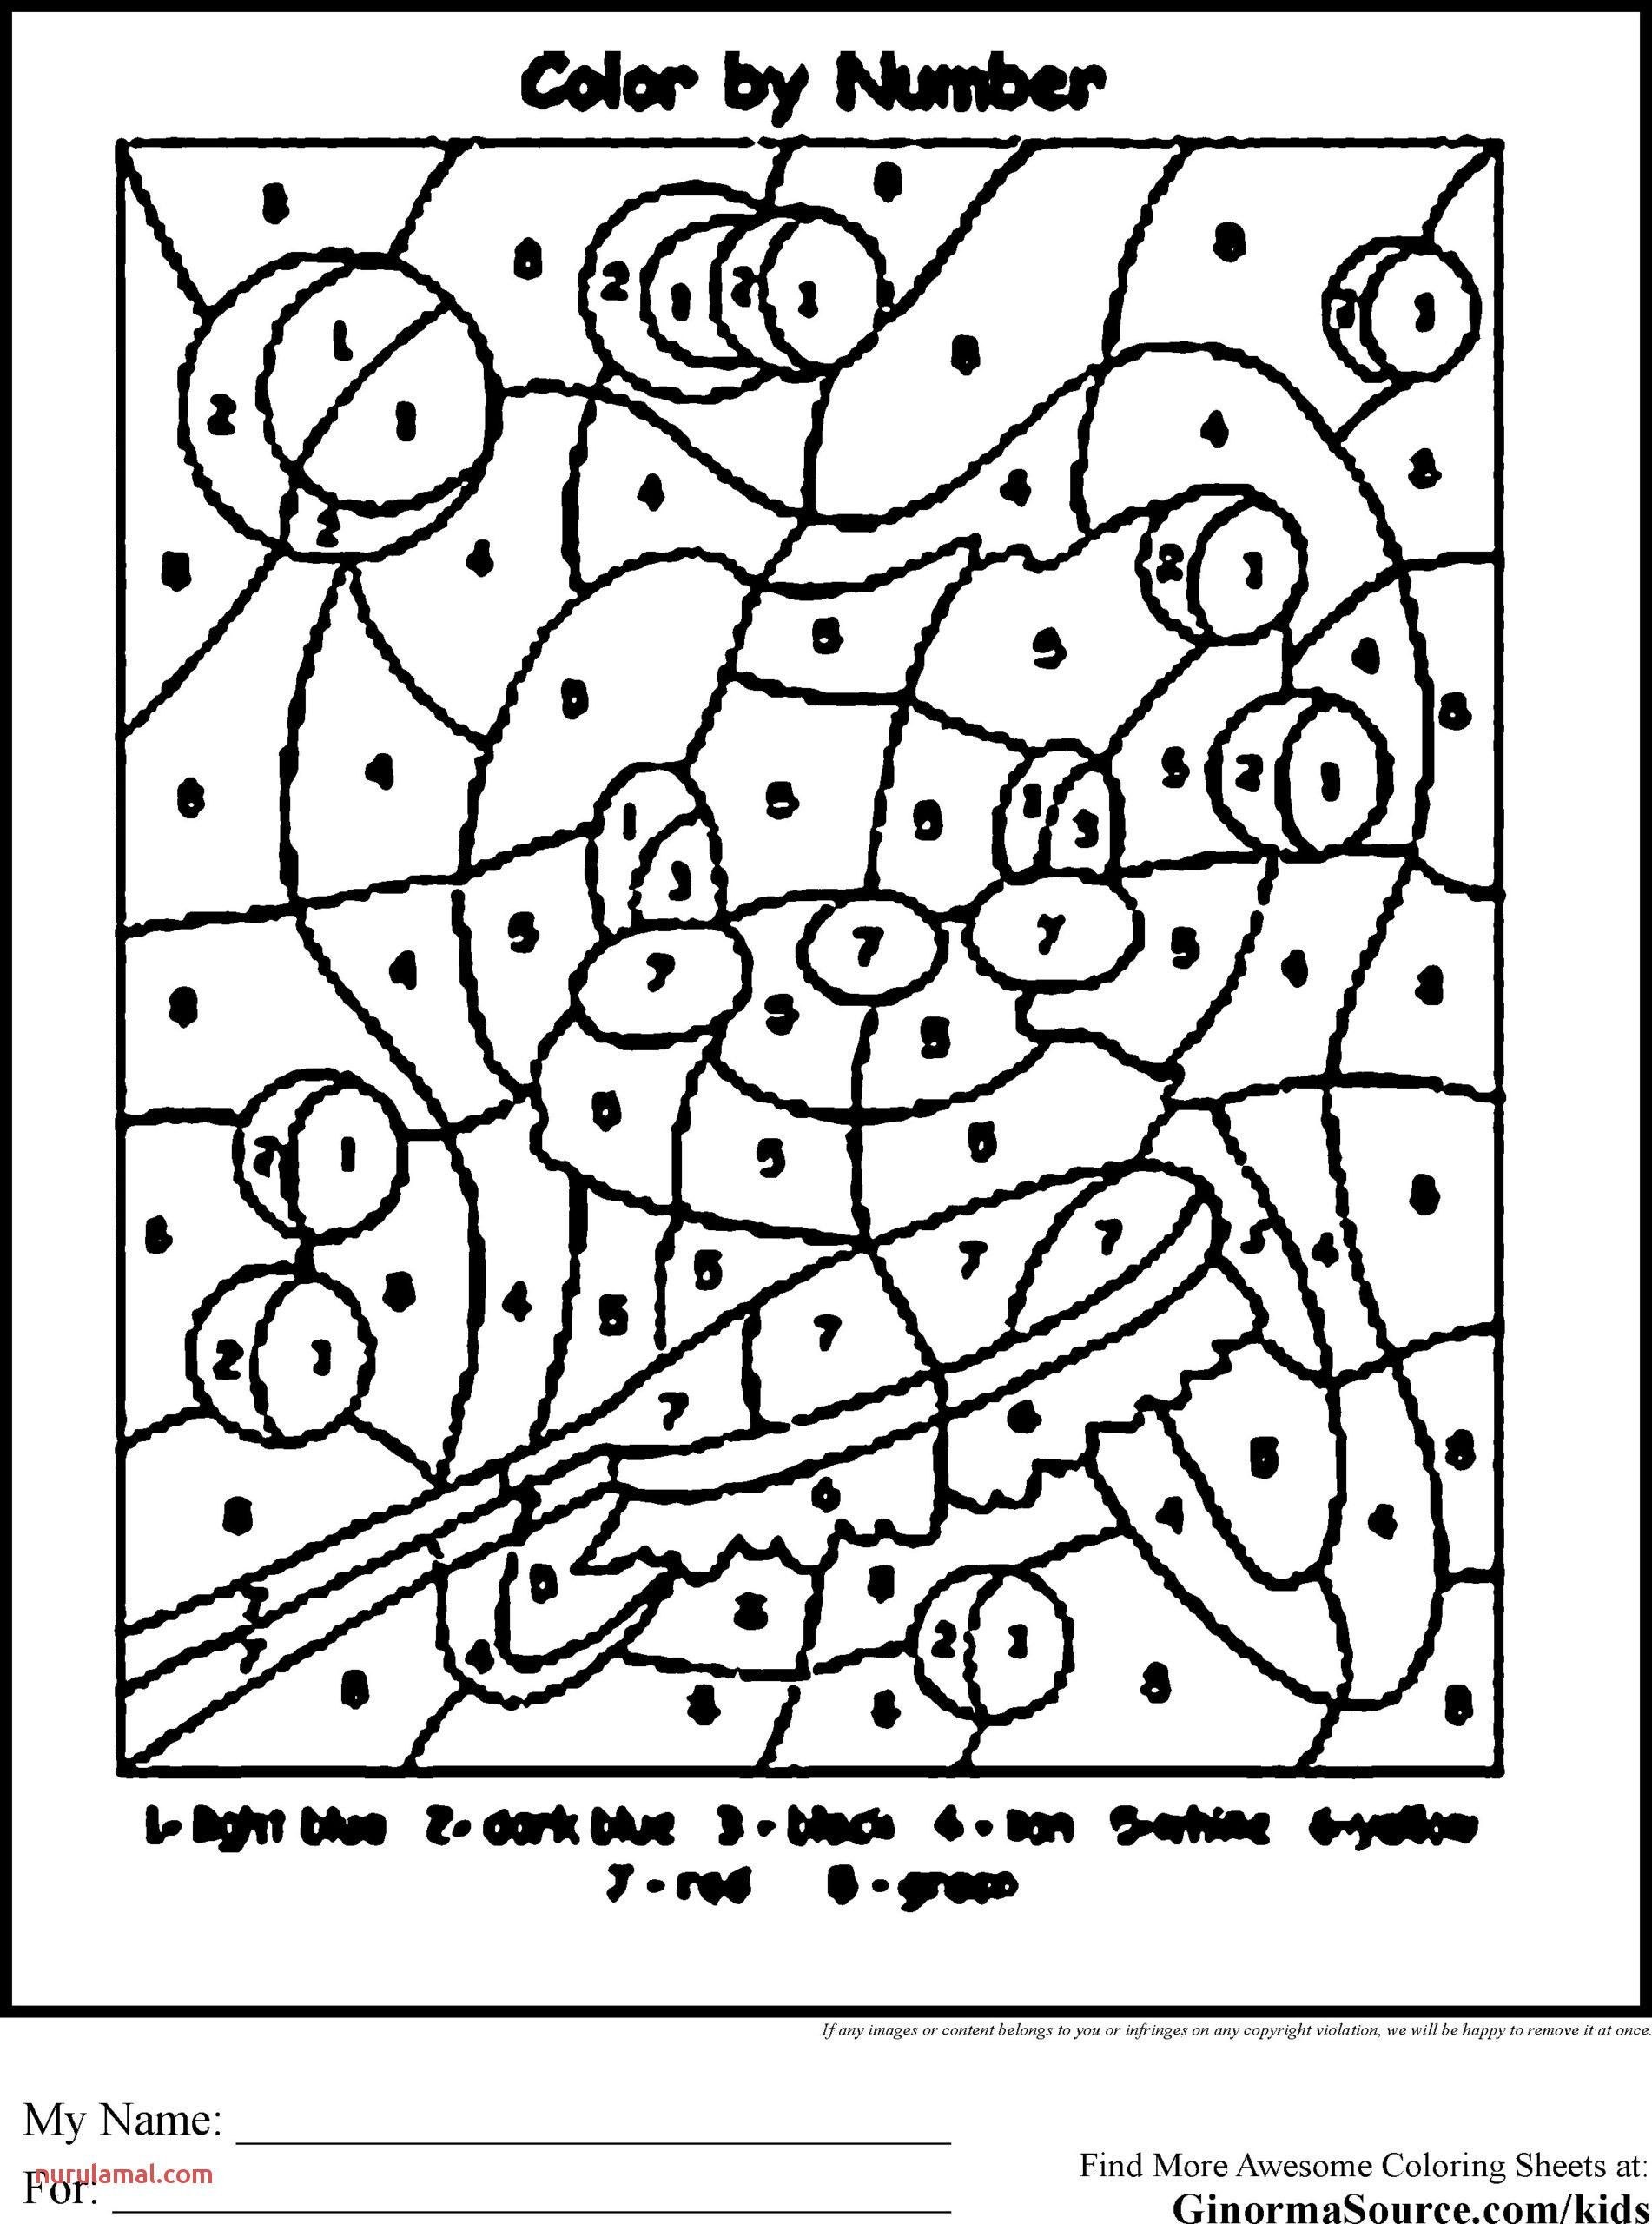 Math Coloring Worksheets 7th Grade Printable Math Worksheets for 7th Graders In 2020